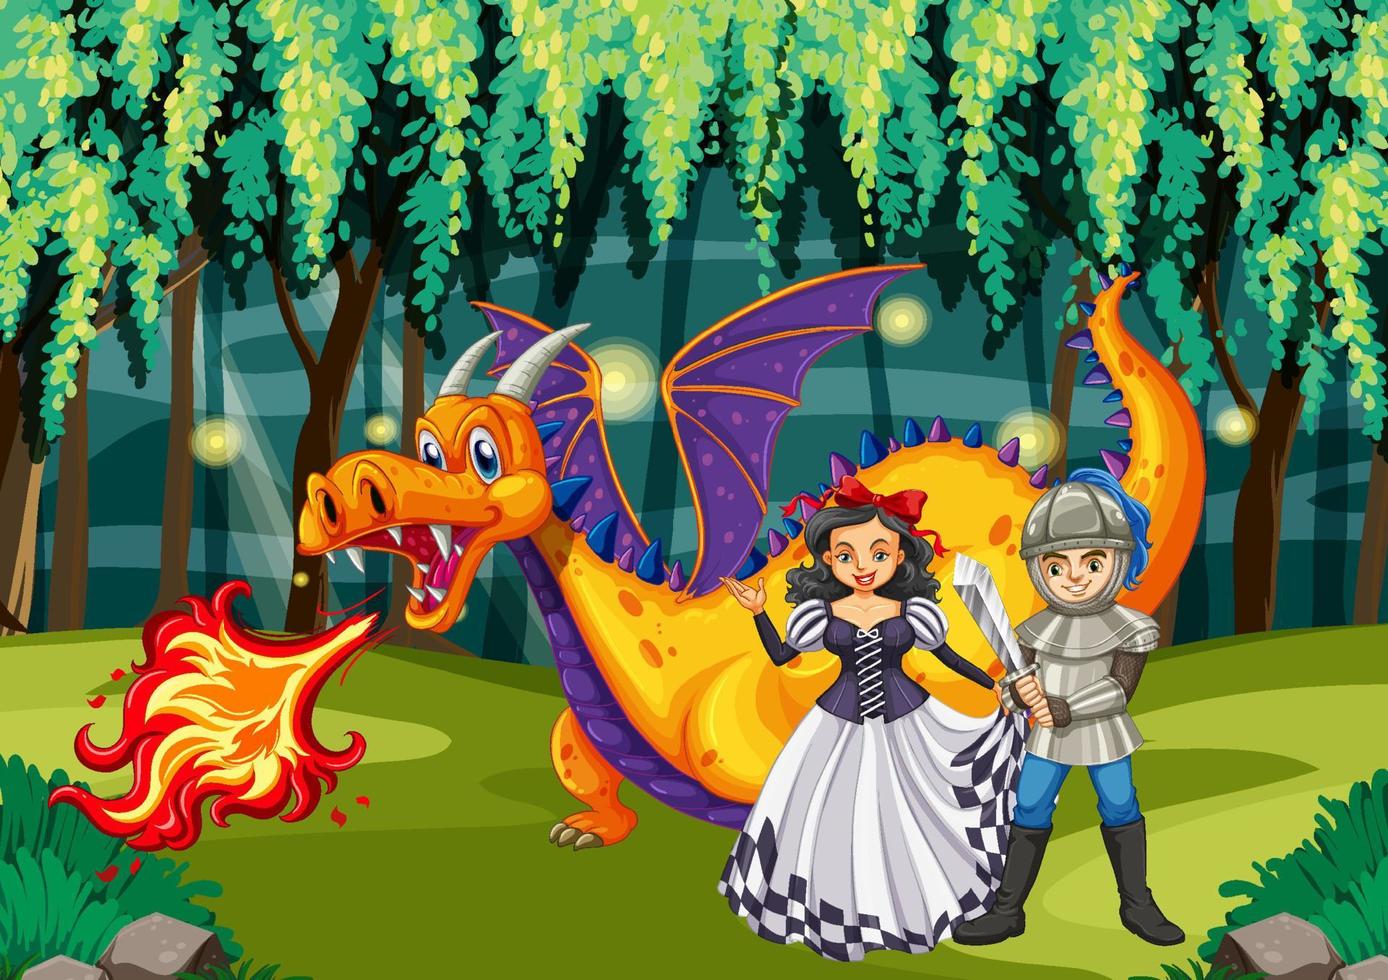 Dragon and knight in enchanted forest vector